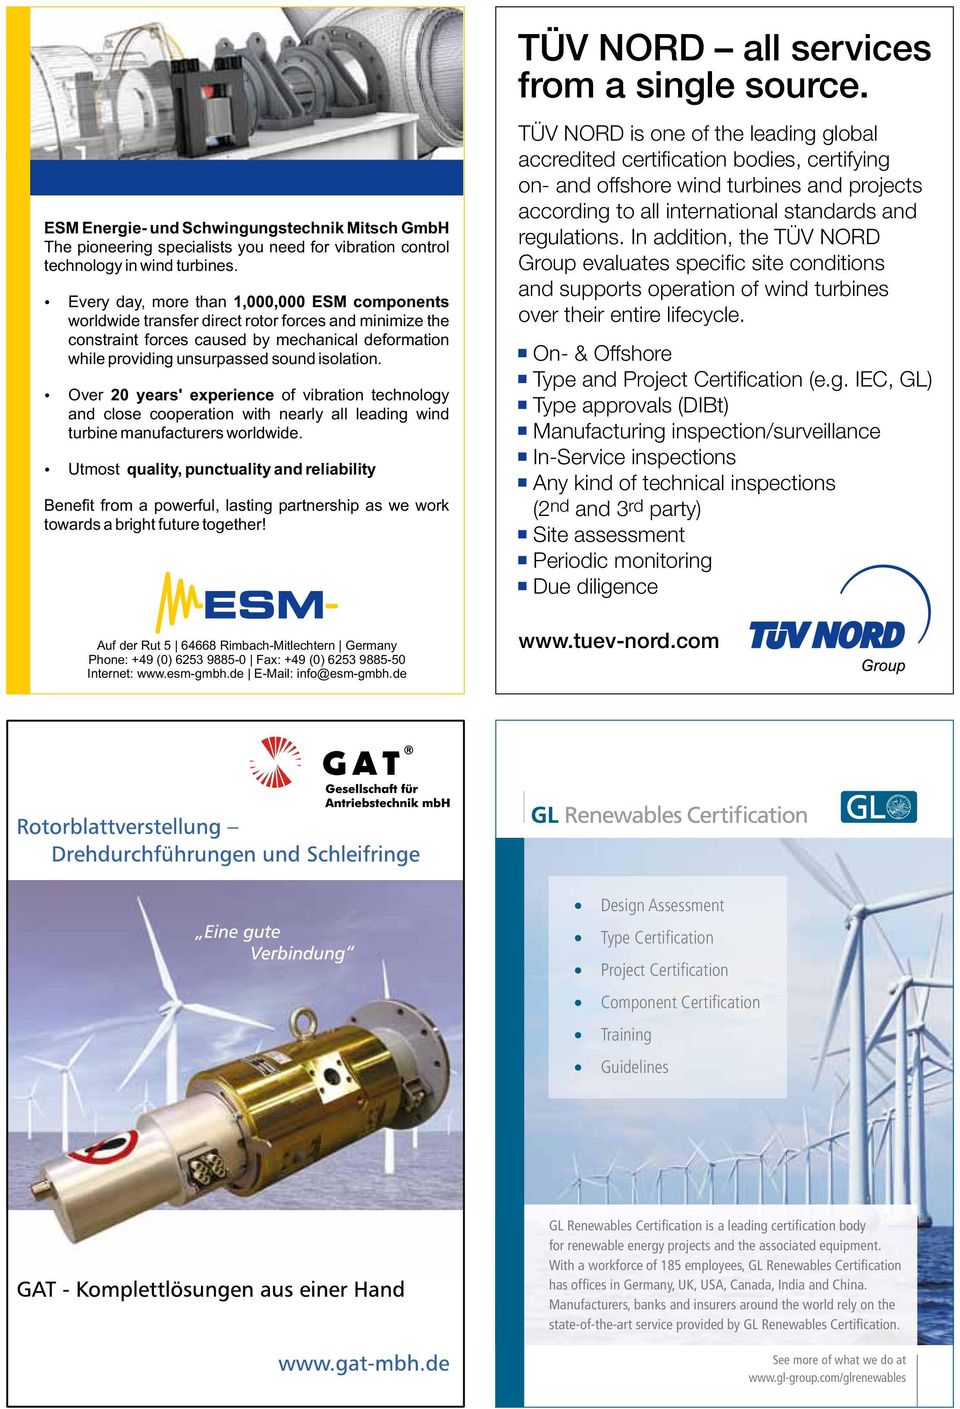 Over 20 years' experience of vibration technology and close cooperation with nearly all leading wind turbine manufacturers worldwide.